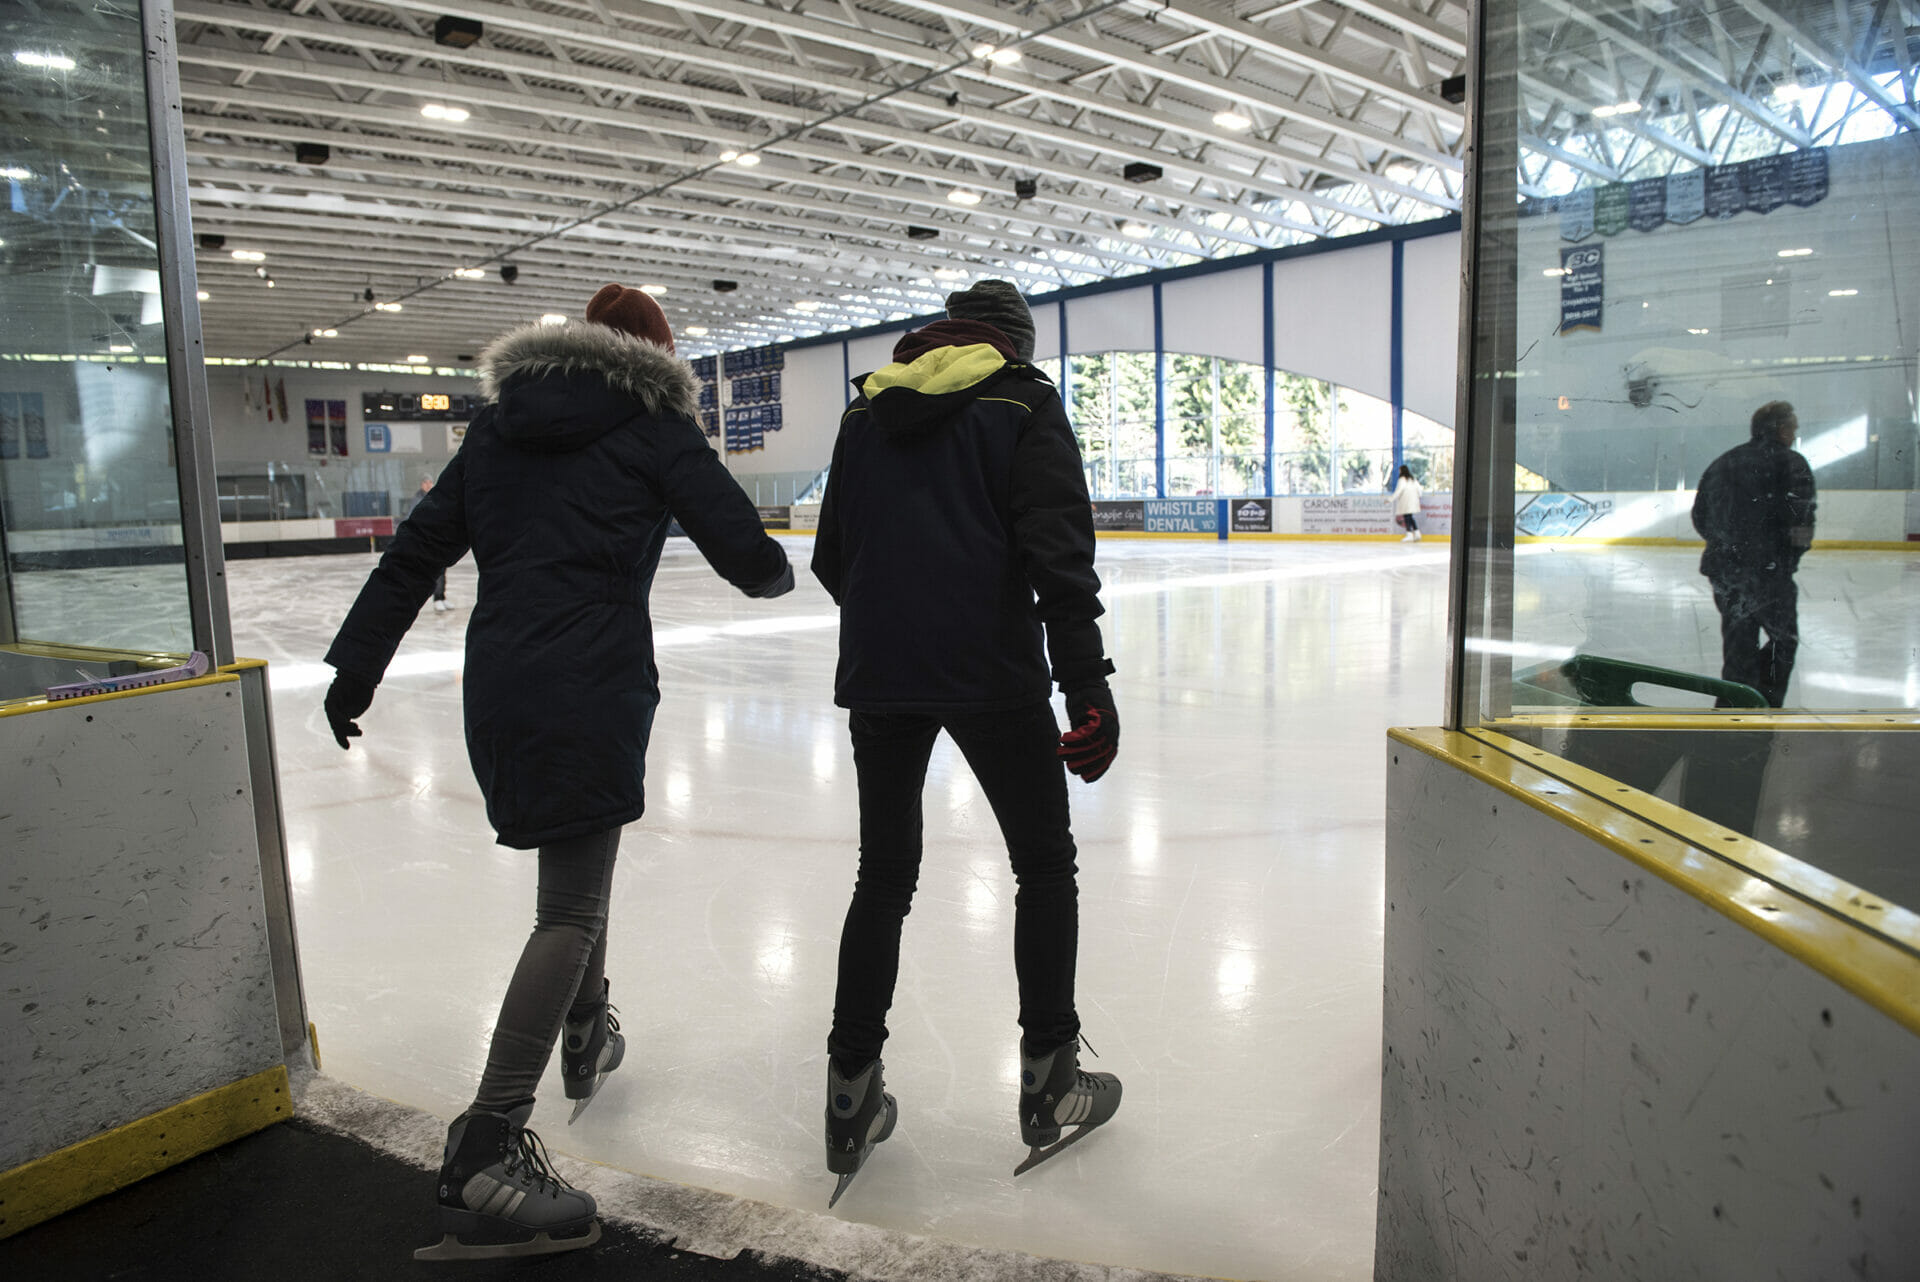 Public Skating at Meadow Park Sports Centre - Photo by Guy Fattal